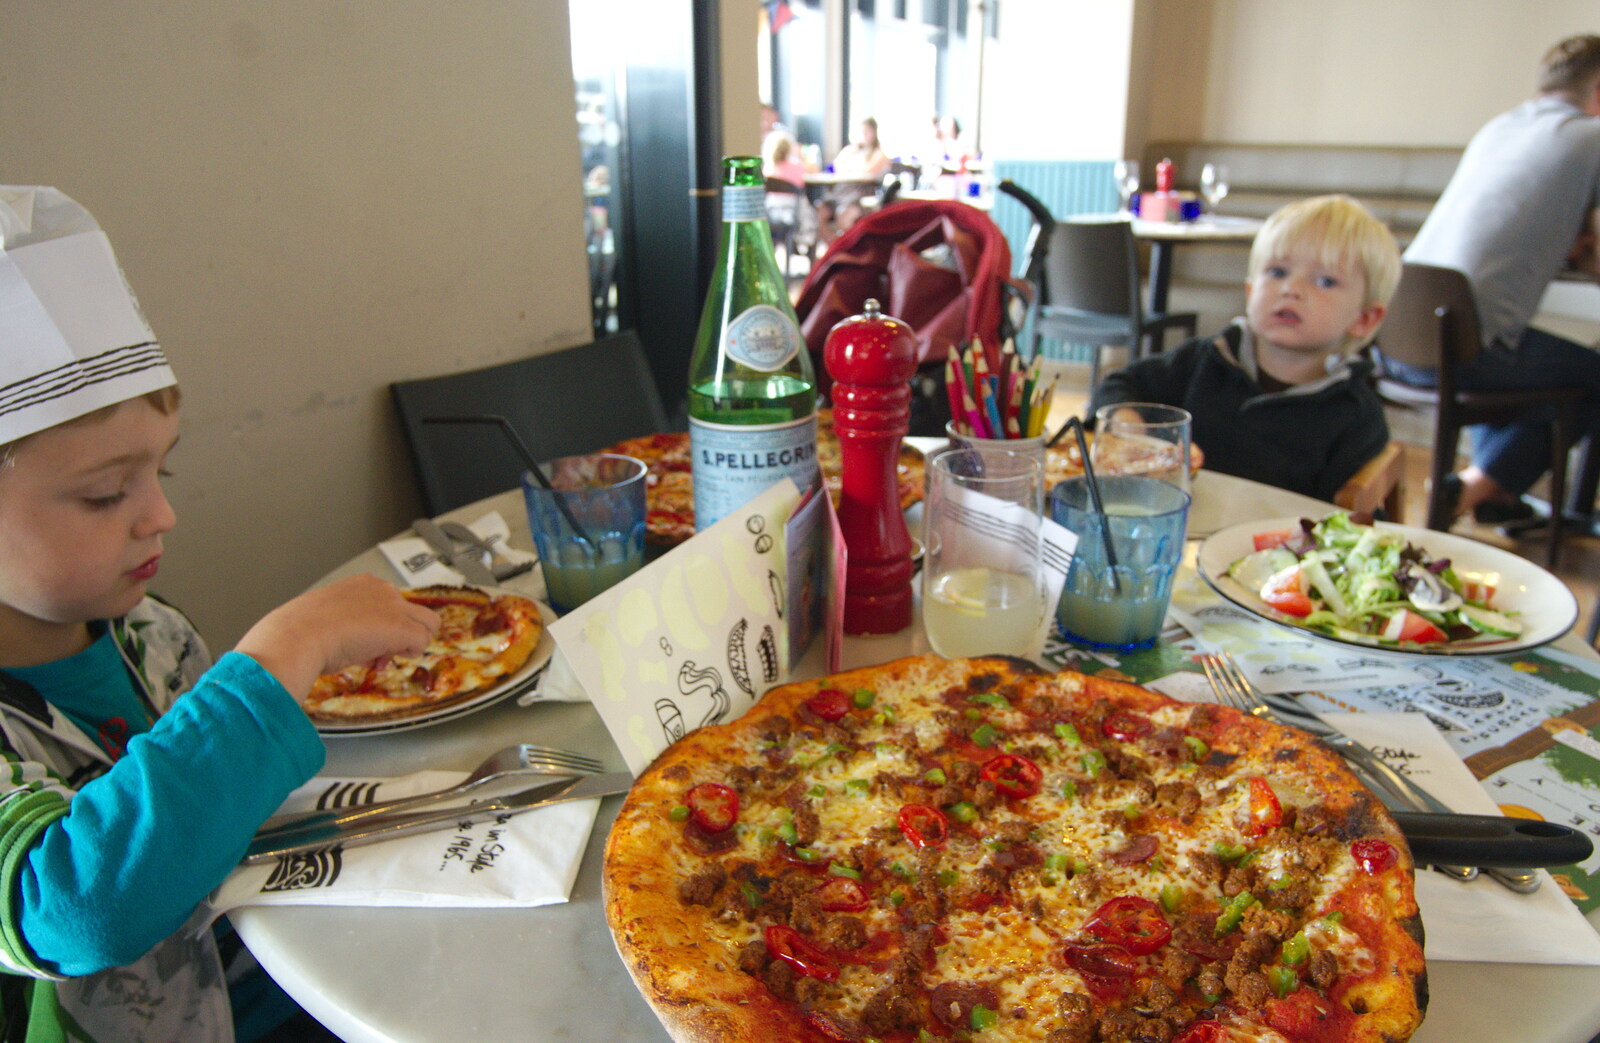 Nosher's pizza arrives from Isobel's Race For Life, Chantry Park, Ipswich - 11th June 2014